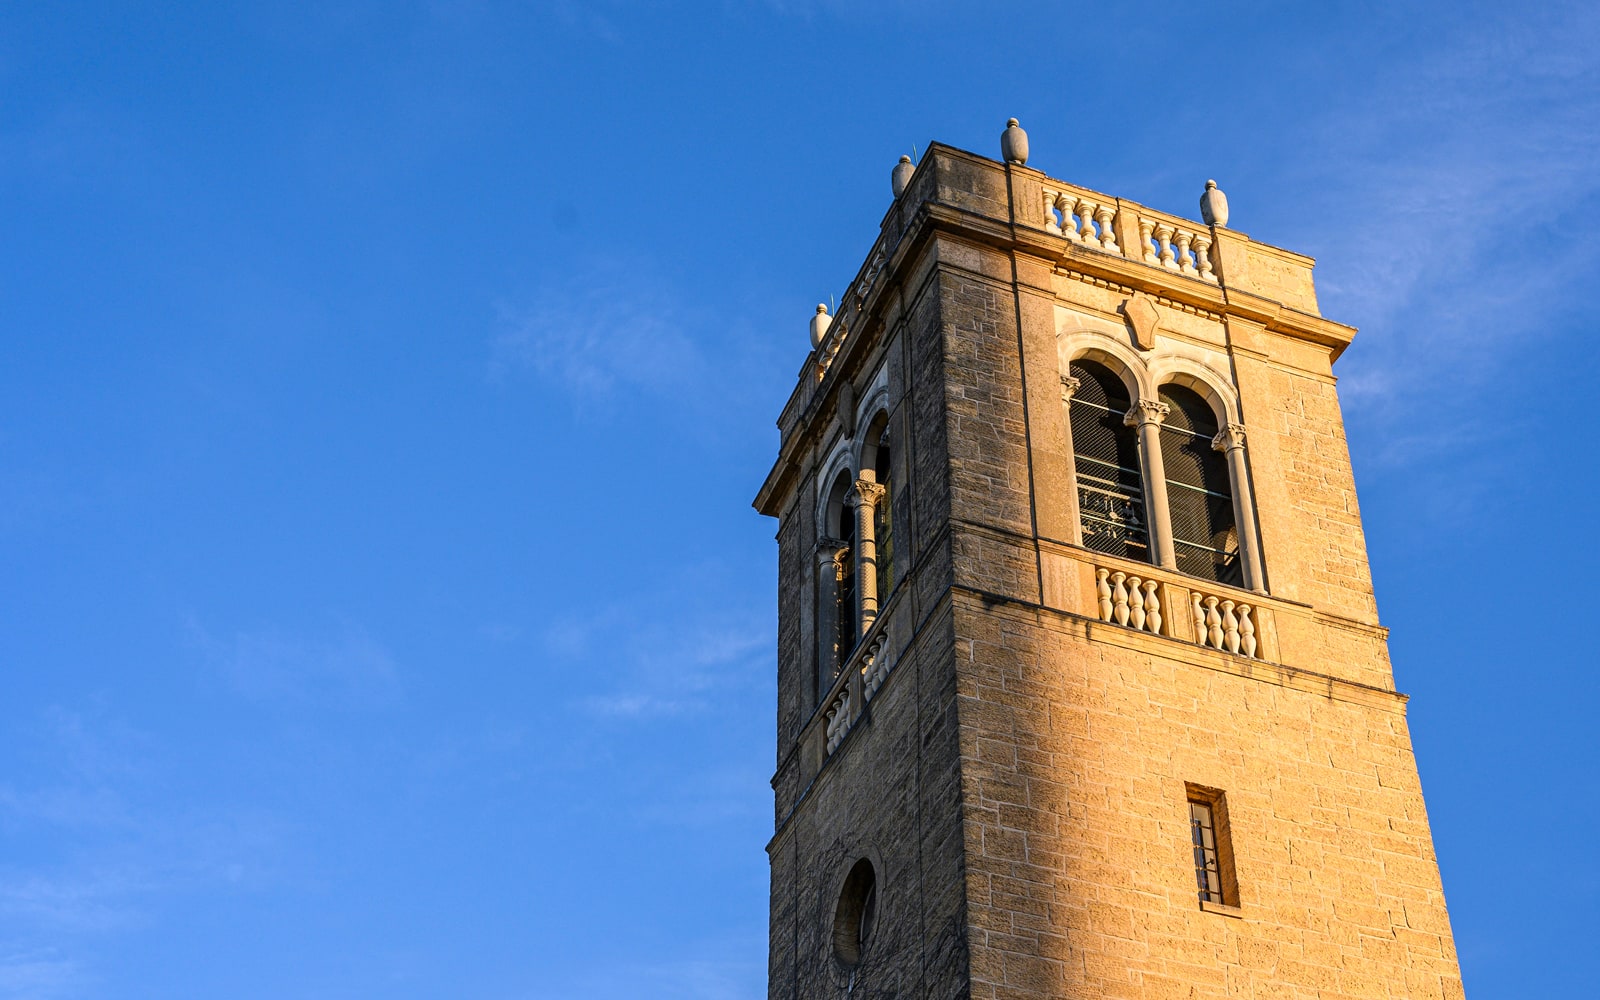 The top of the Carillon Tower at UW–Madison against a blue sky.